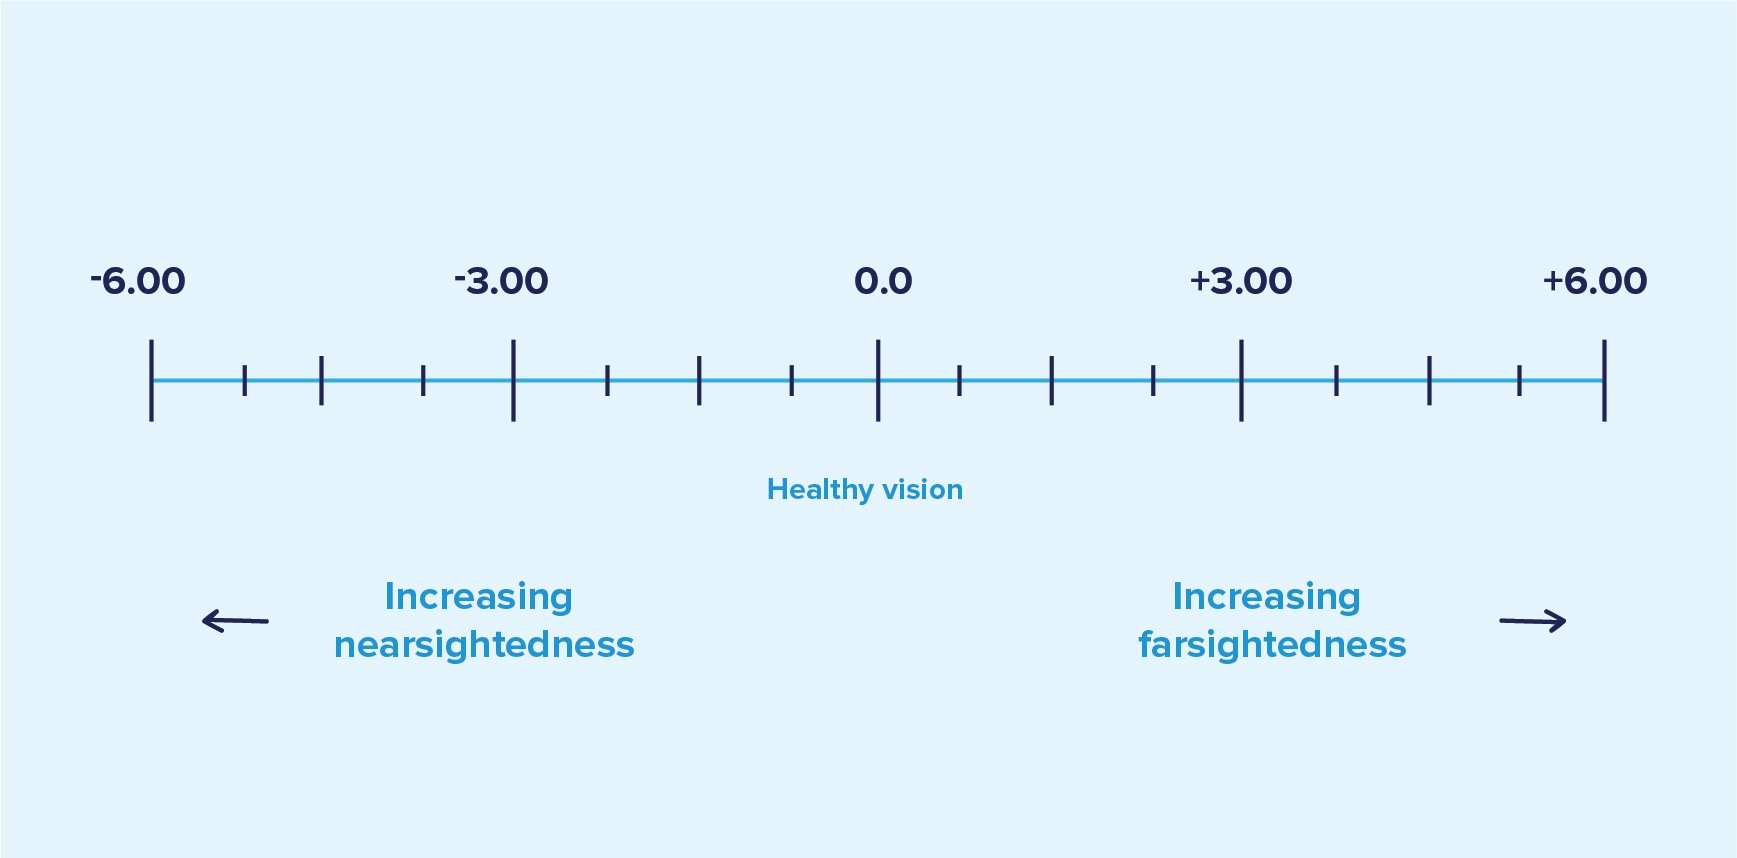 Number scale in diopters illustrating increasing nearsightedness and farsightedness on either end